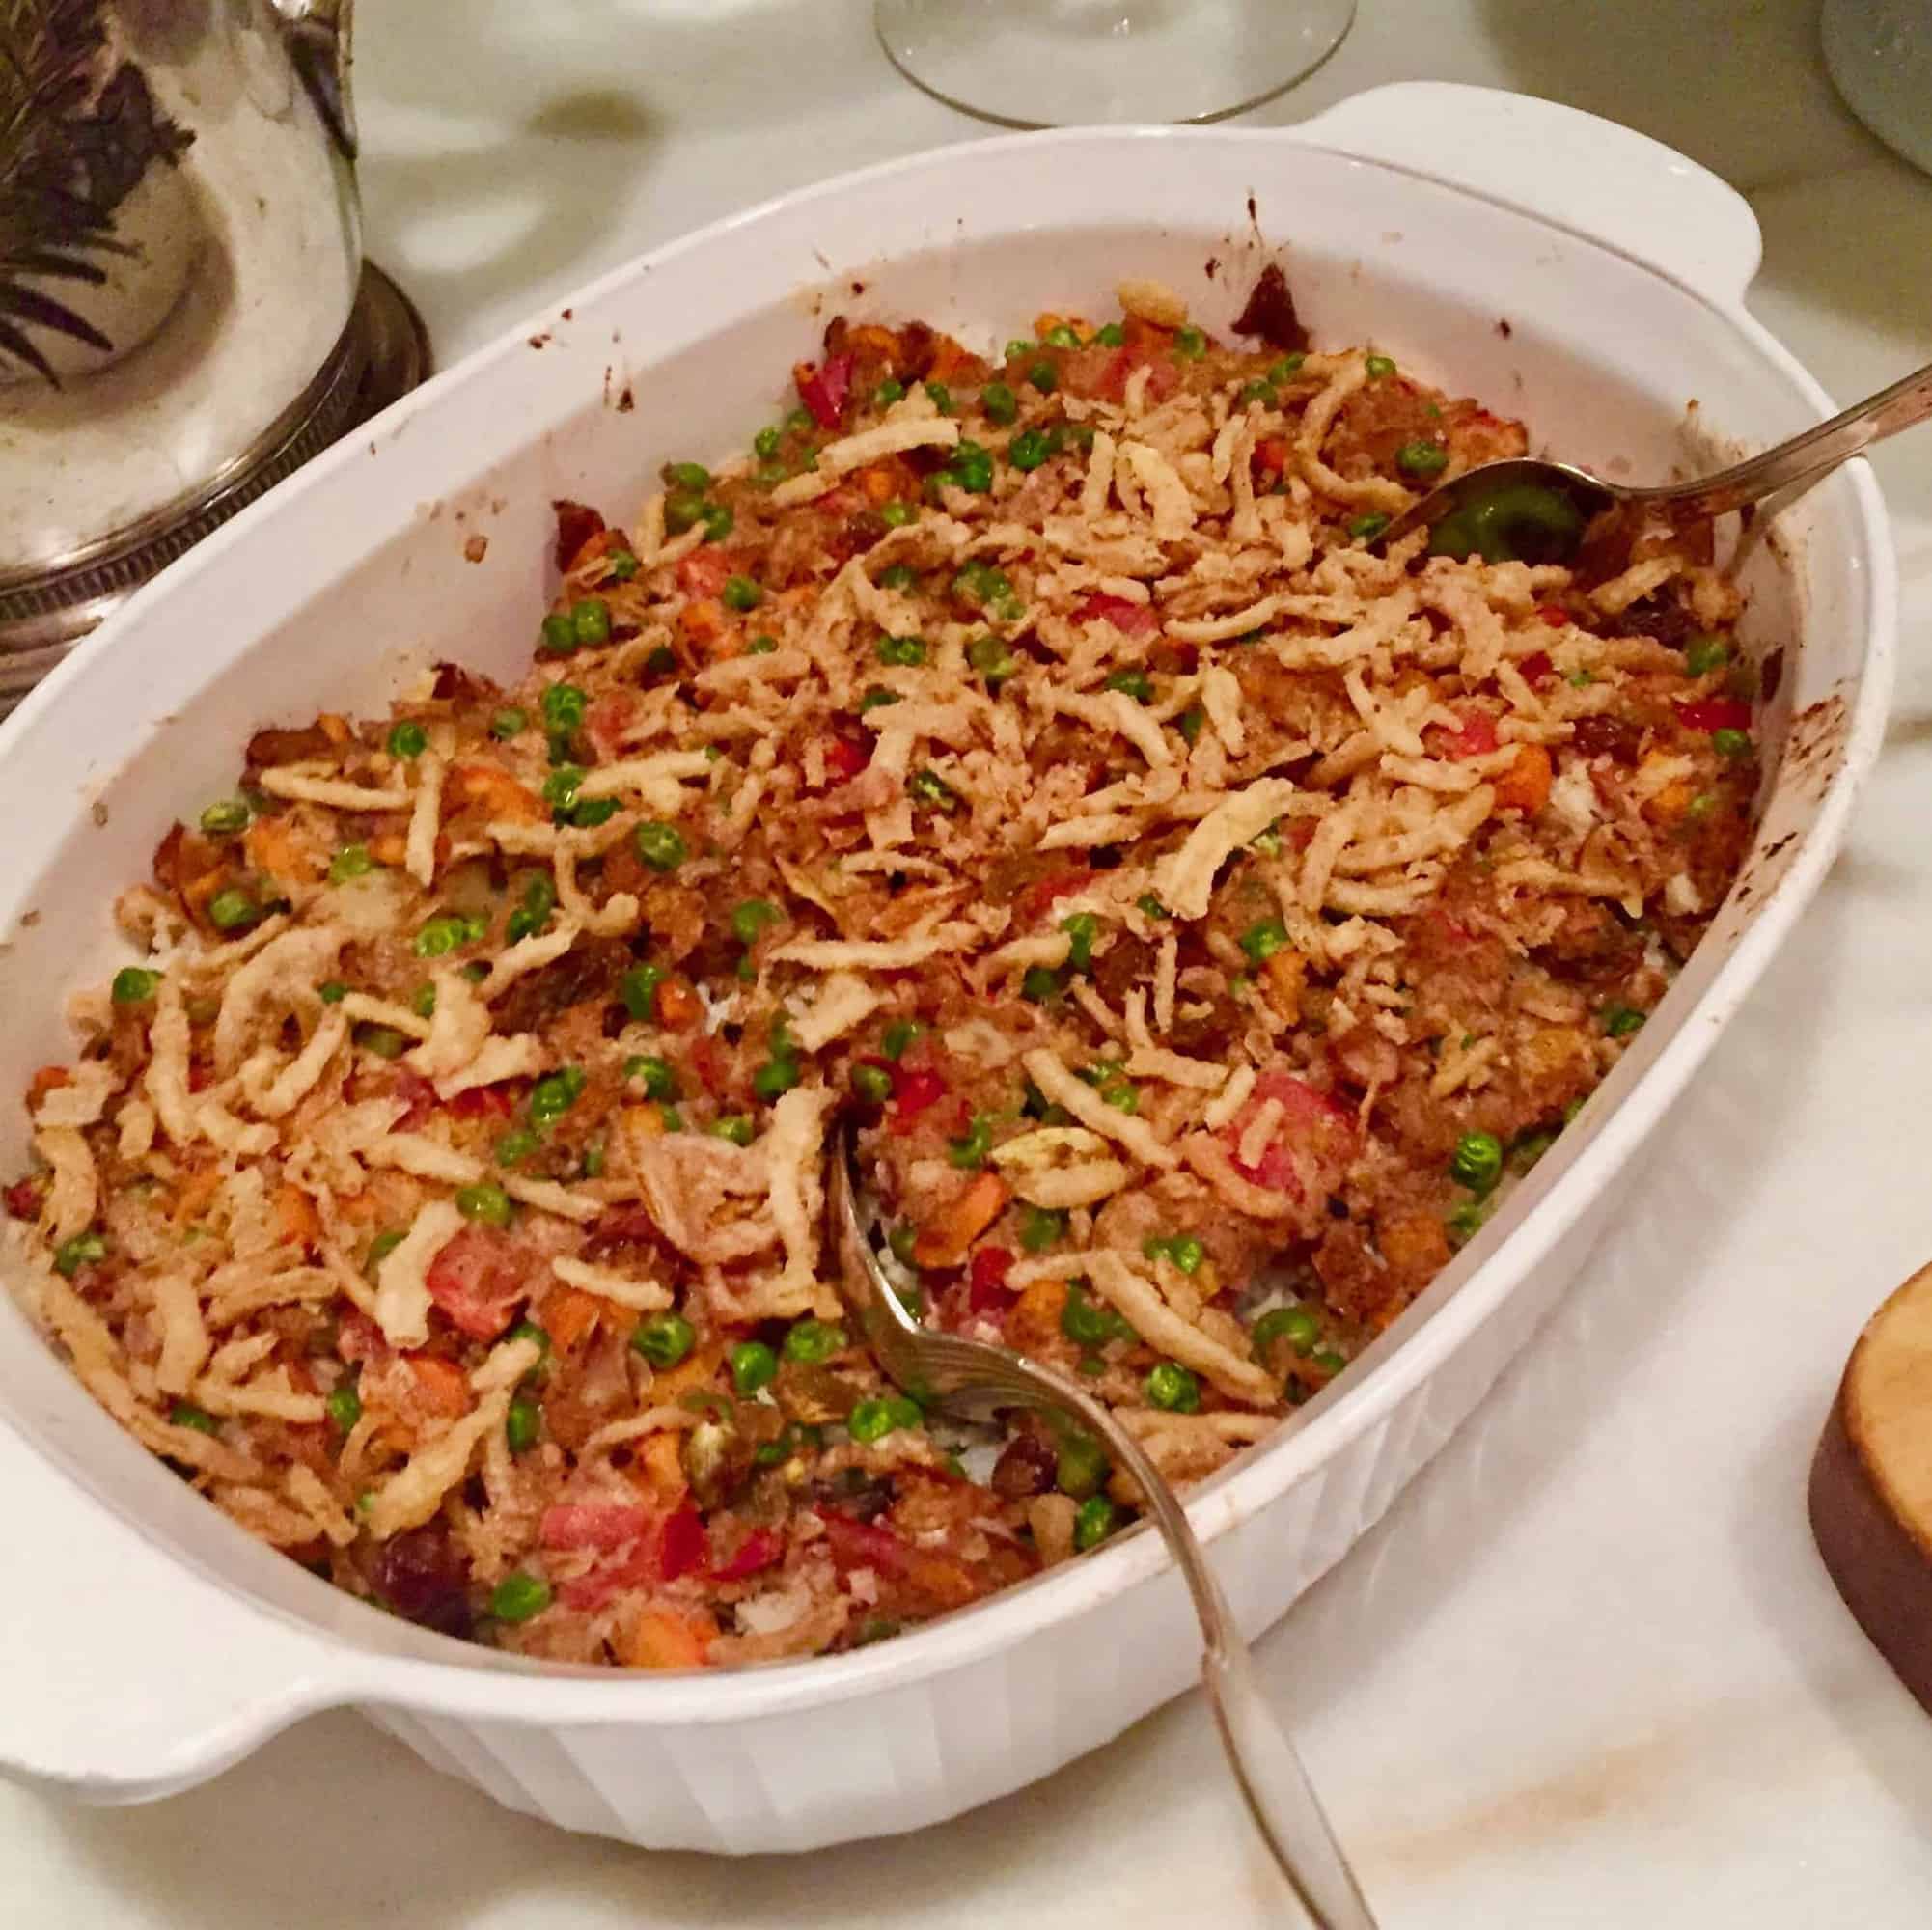 Dinner Party Dishes Vegetable Biryani C H E W I N G T H E F A T